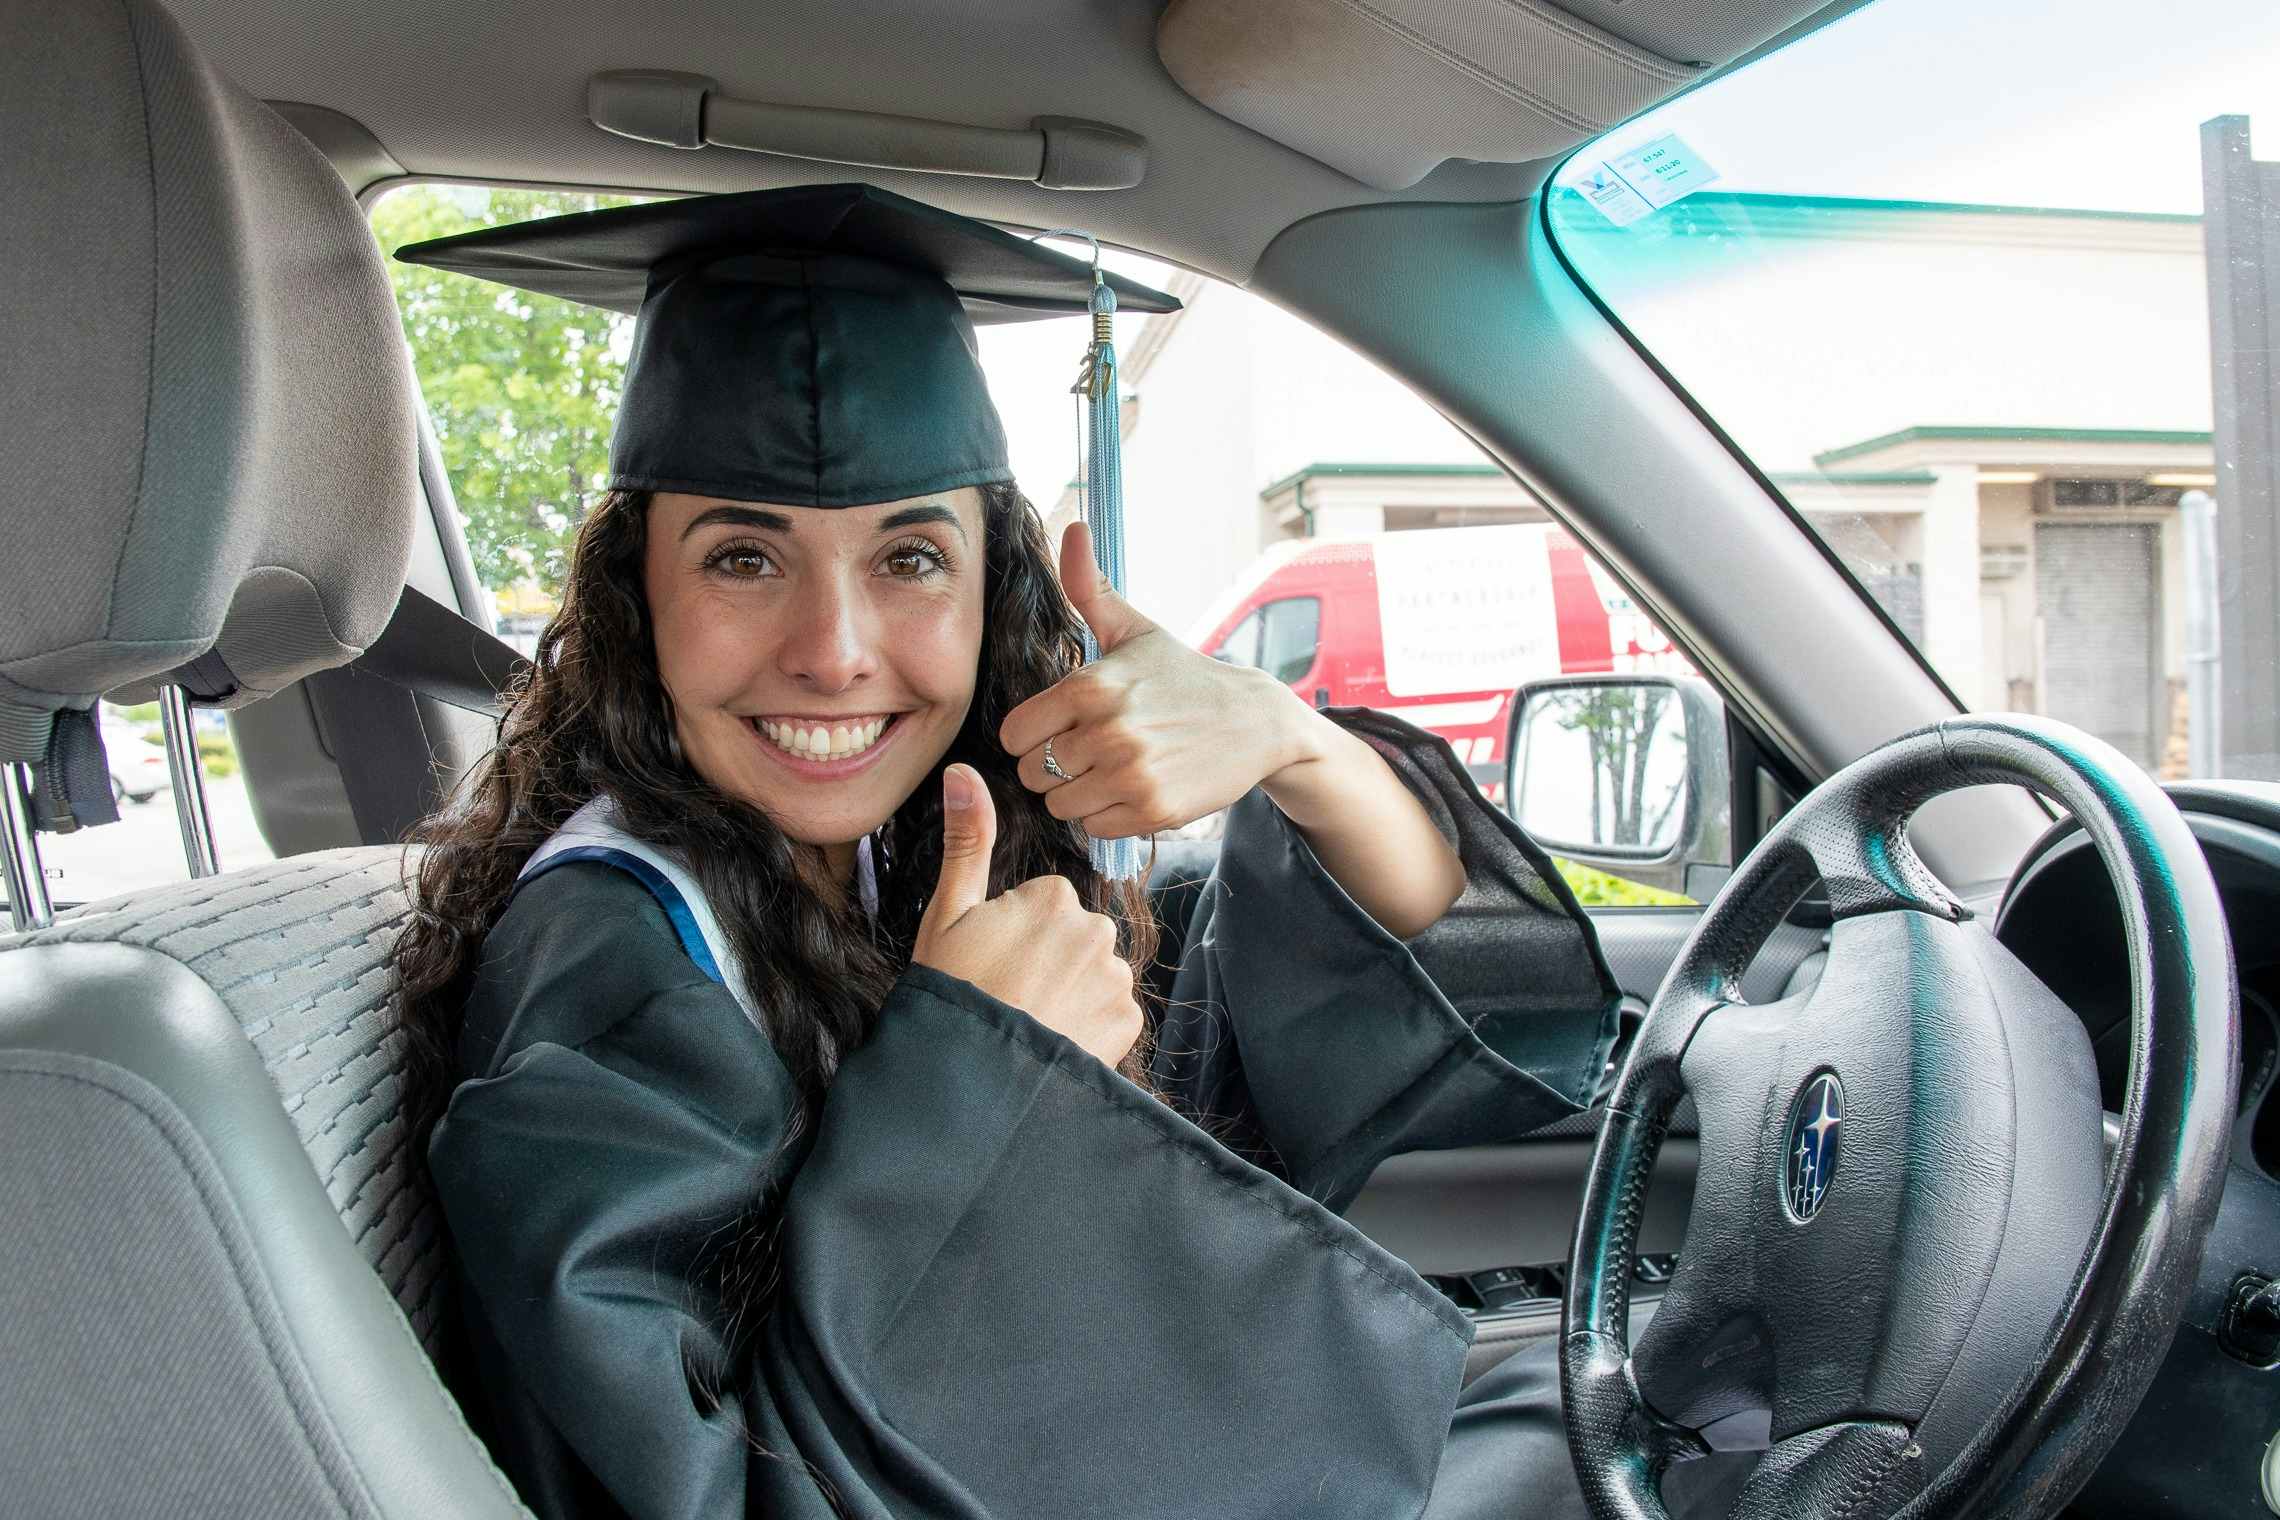 Woman in a graduation cap and gown sitting behind the wheel of a car.